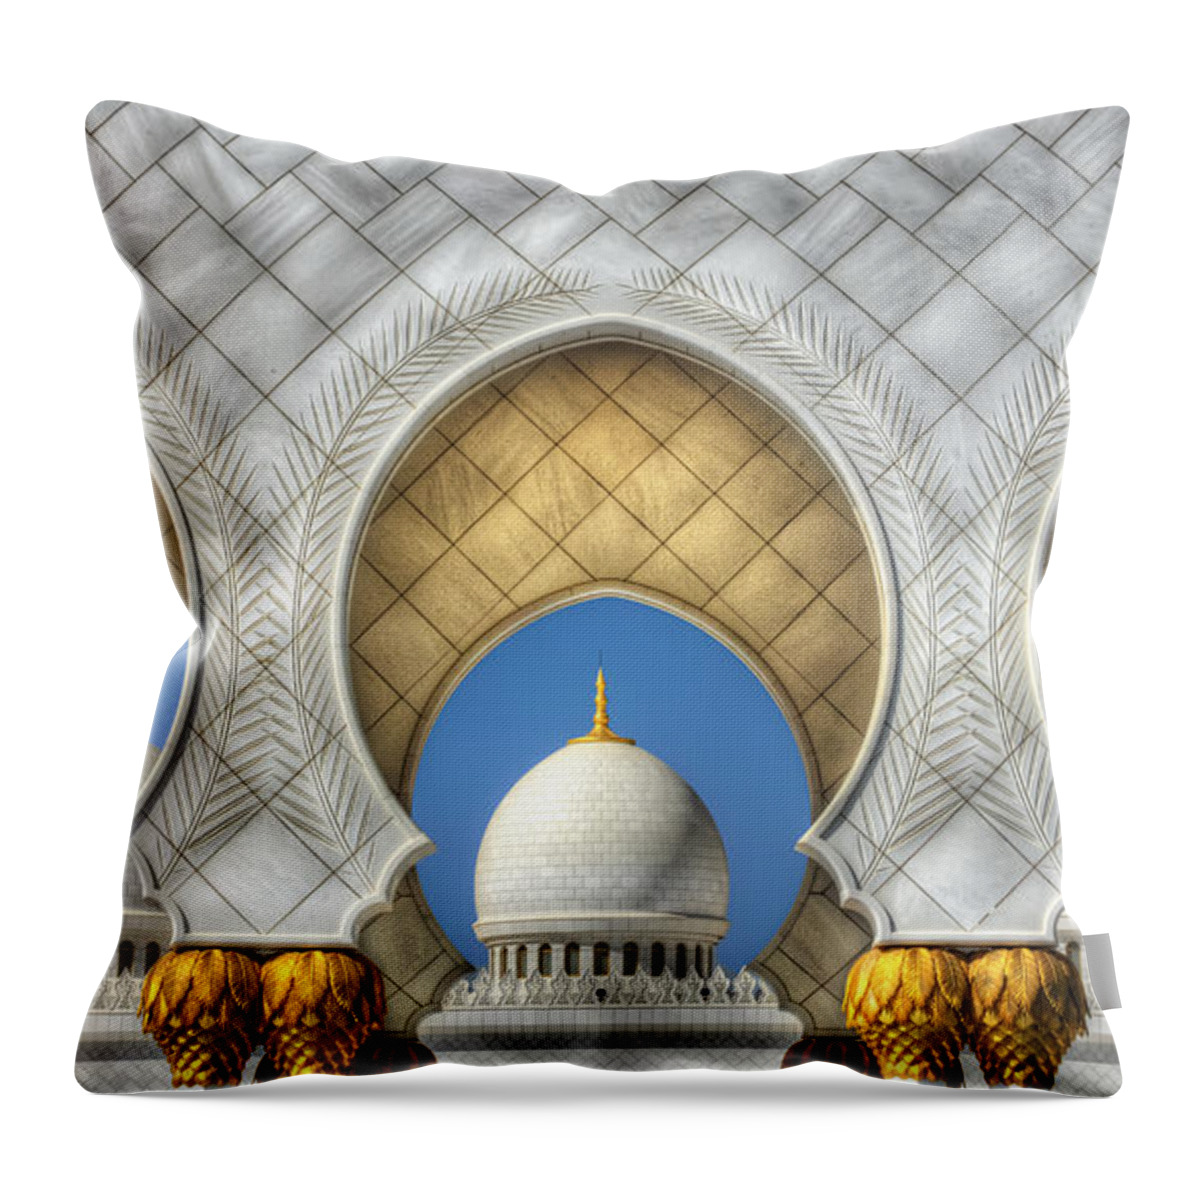 Inductee Throw Pillow featuring the photograph Hindu Temple by John Swartz